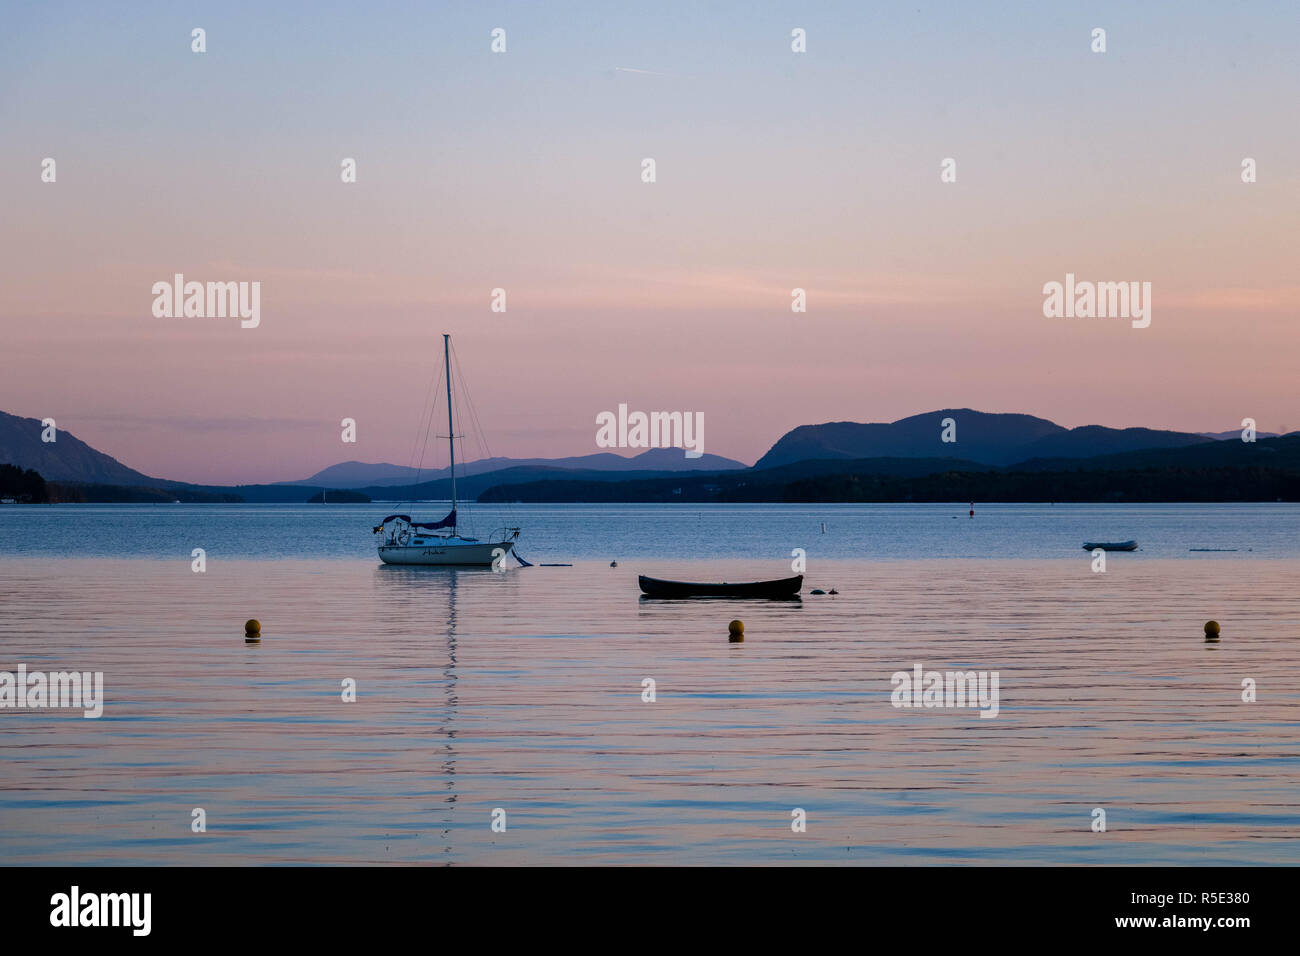 Two boats at the Magog Lake at sunset. The town of Magog, Quebec, Canada. Stock Photo